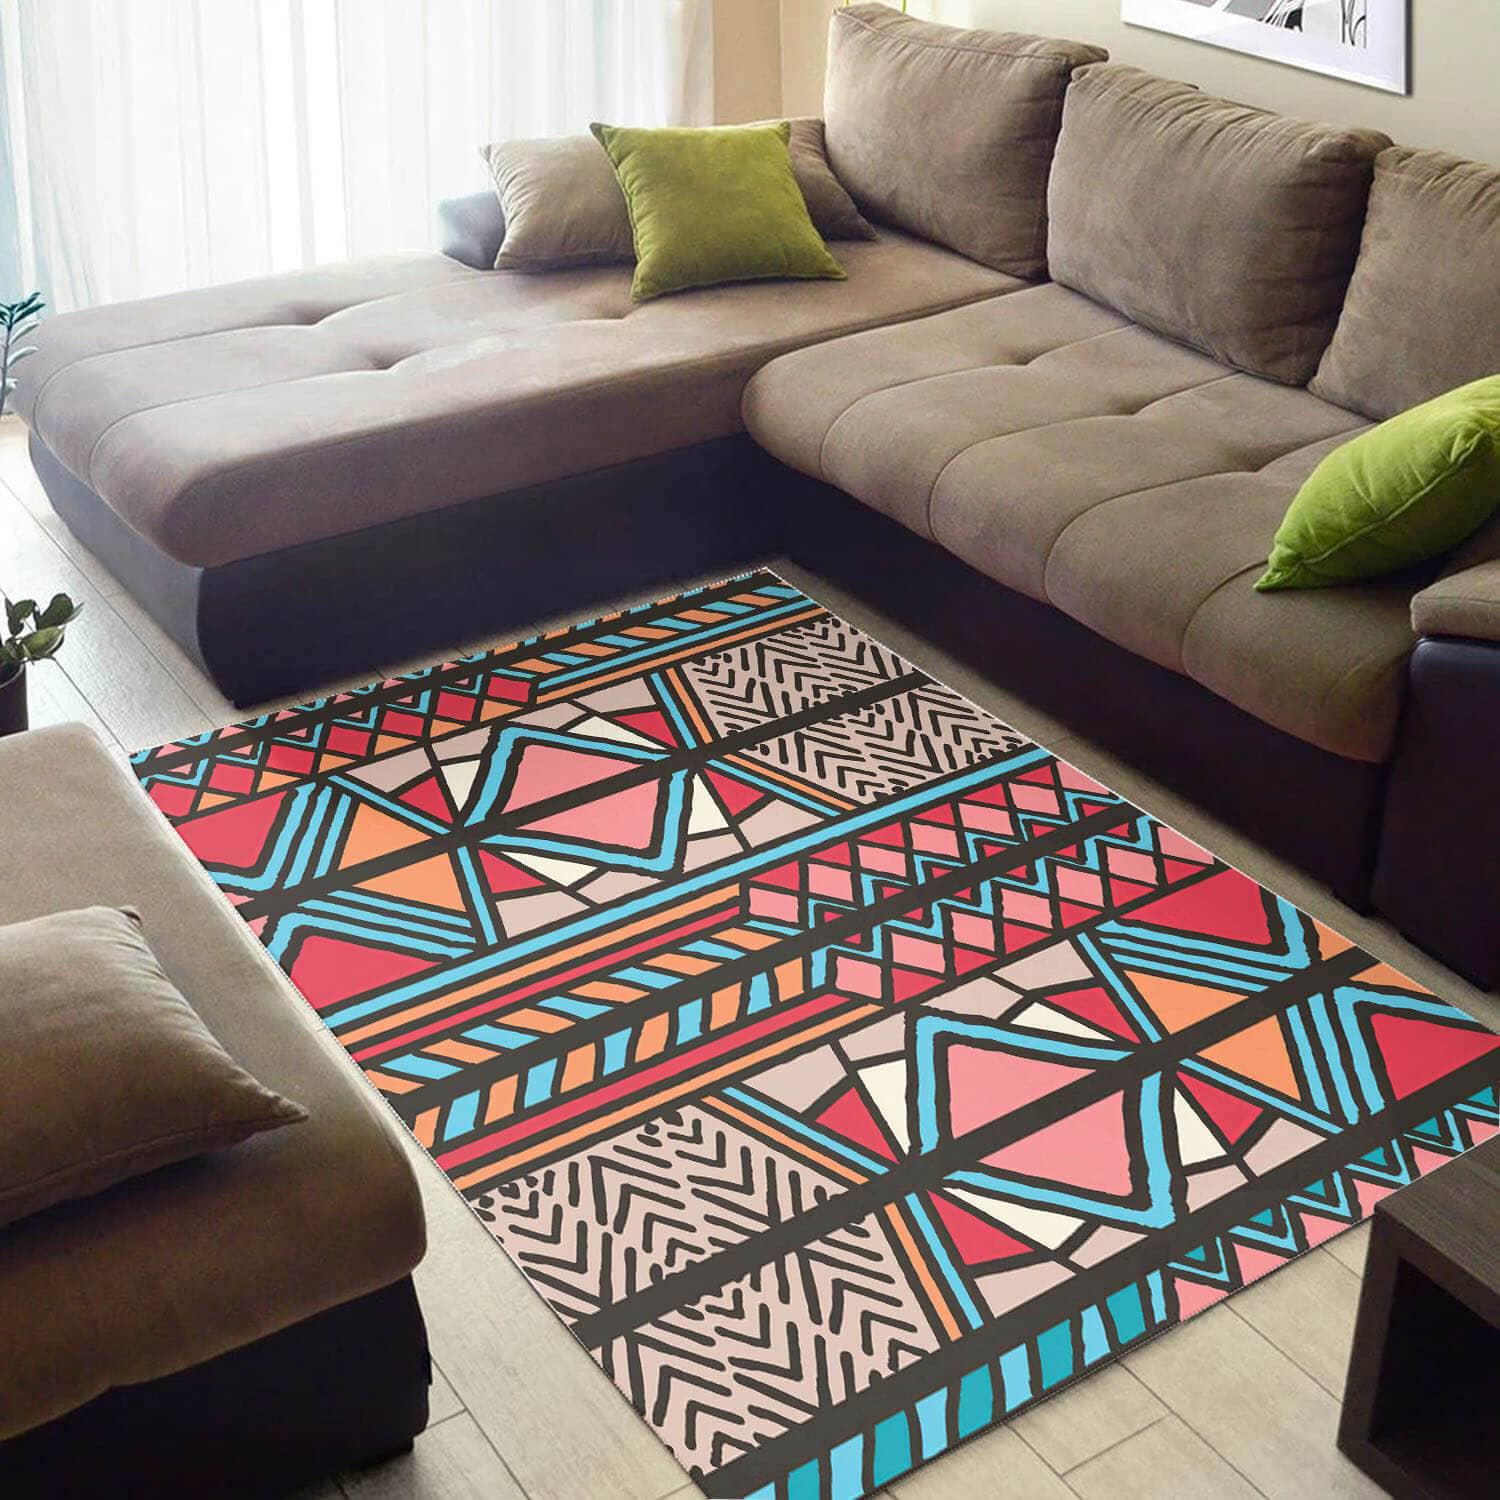 Beautiful African Cool American Black Art Seamless Pattern Style Themed Home Rug